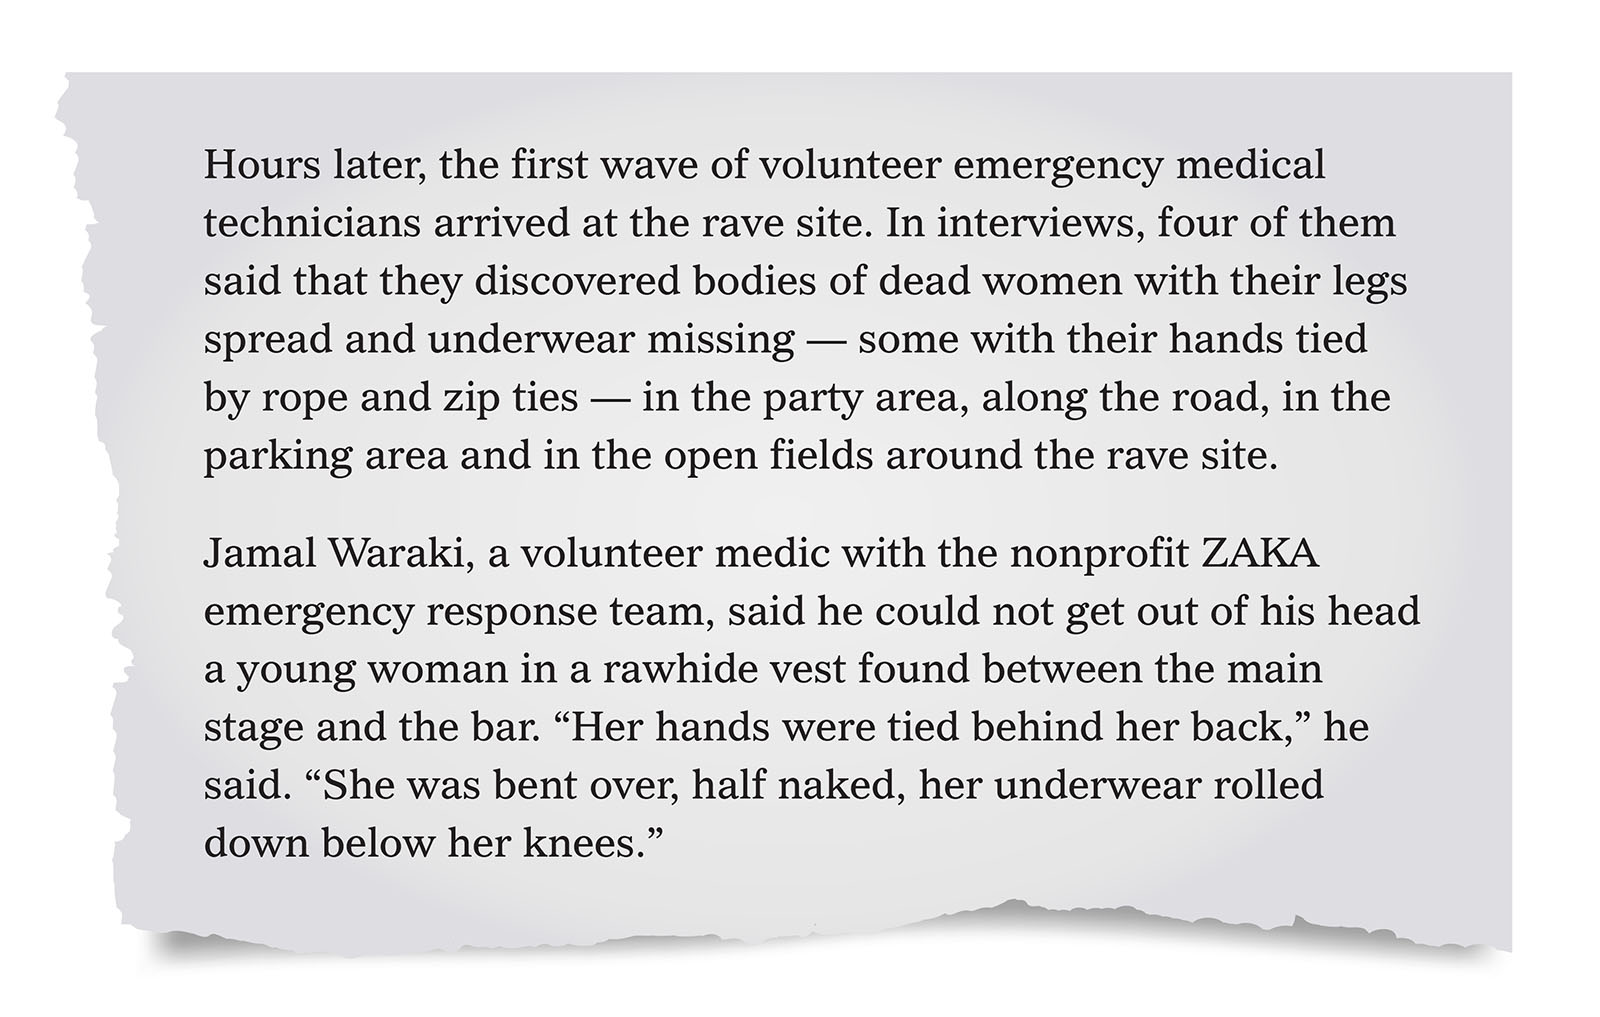 Pull quote:
Hours later, the first wave of volunteer emergency medical technicians arrived at the rave site. In interviews, four of them said that they discovered bodies of dead women with their legs spread and underwear missing — some with their hands tied by rope and zip ties — in the party area, along the road, in the parking area and in the open fields around the rave site. 
Jamal Waraki, a volunteer medic with the nonprofit ZAKA emergency response team, said he could not get out of his head a young woman in a rawhide vest found between the main stage and the bar. “Her hands were tied behind her back,” he said. “She was bent over, half naked, her underwear rolled down below her knees.”